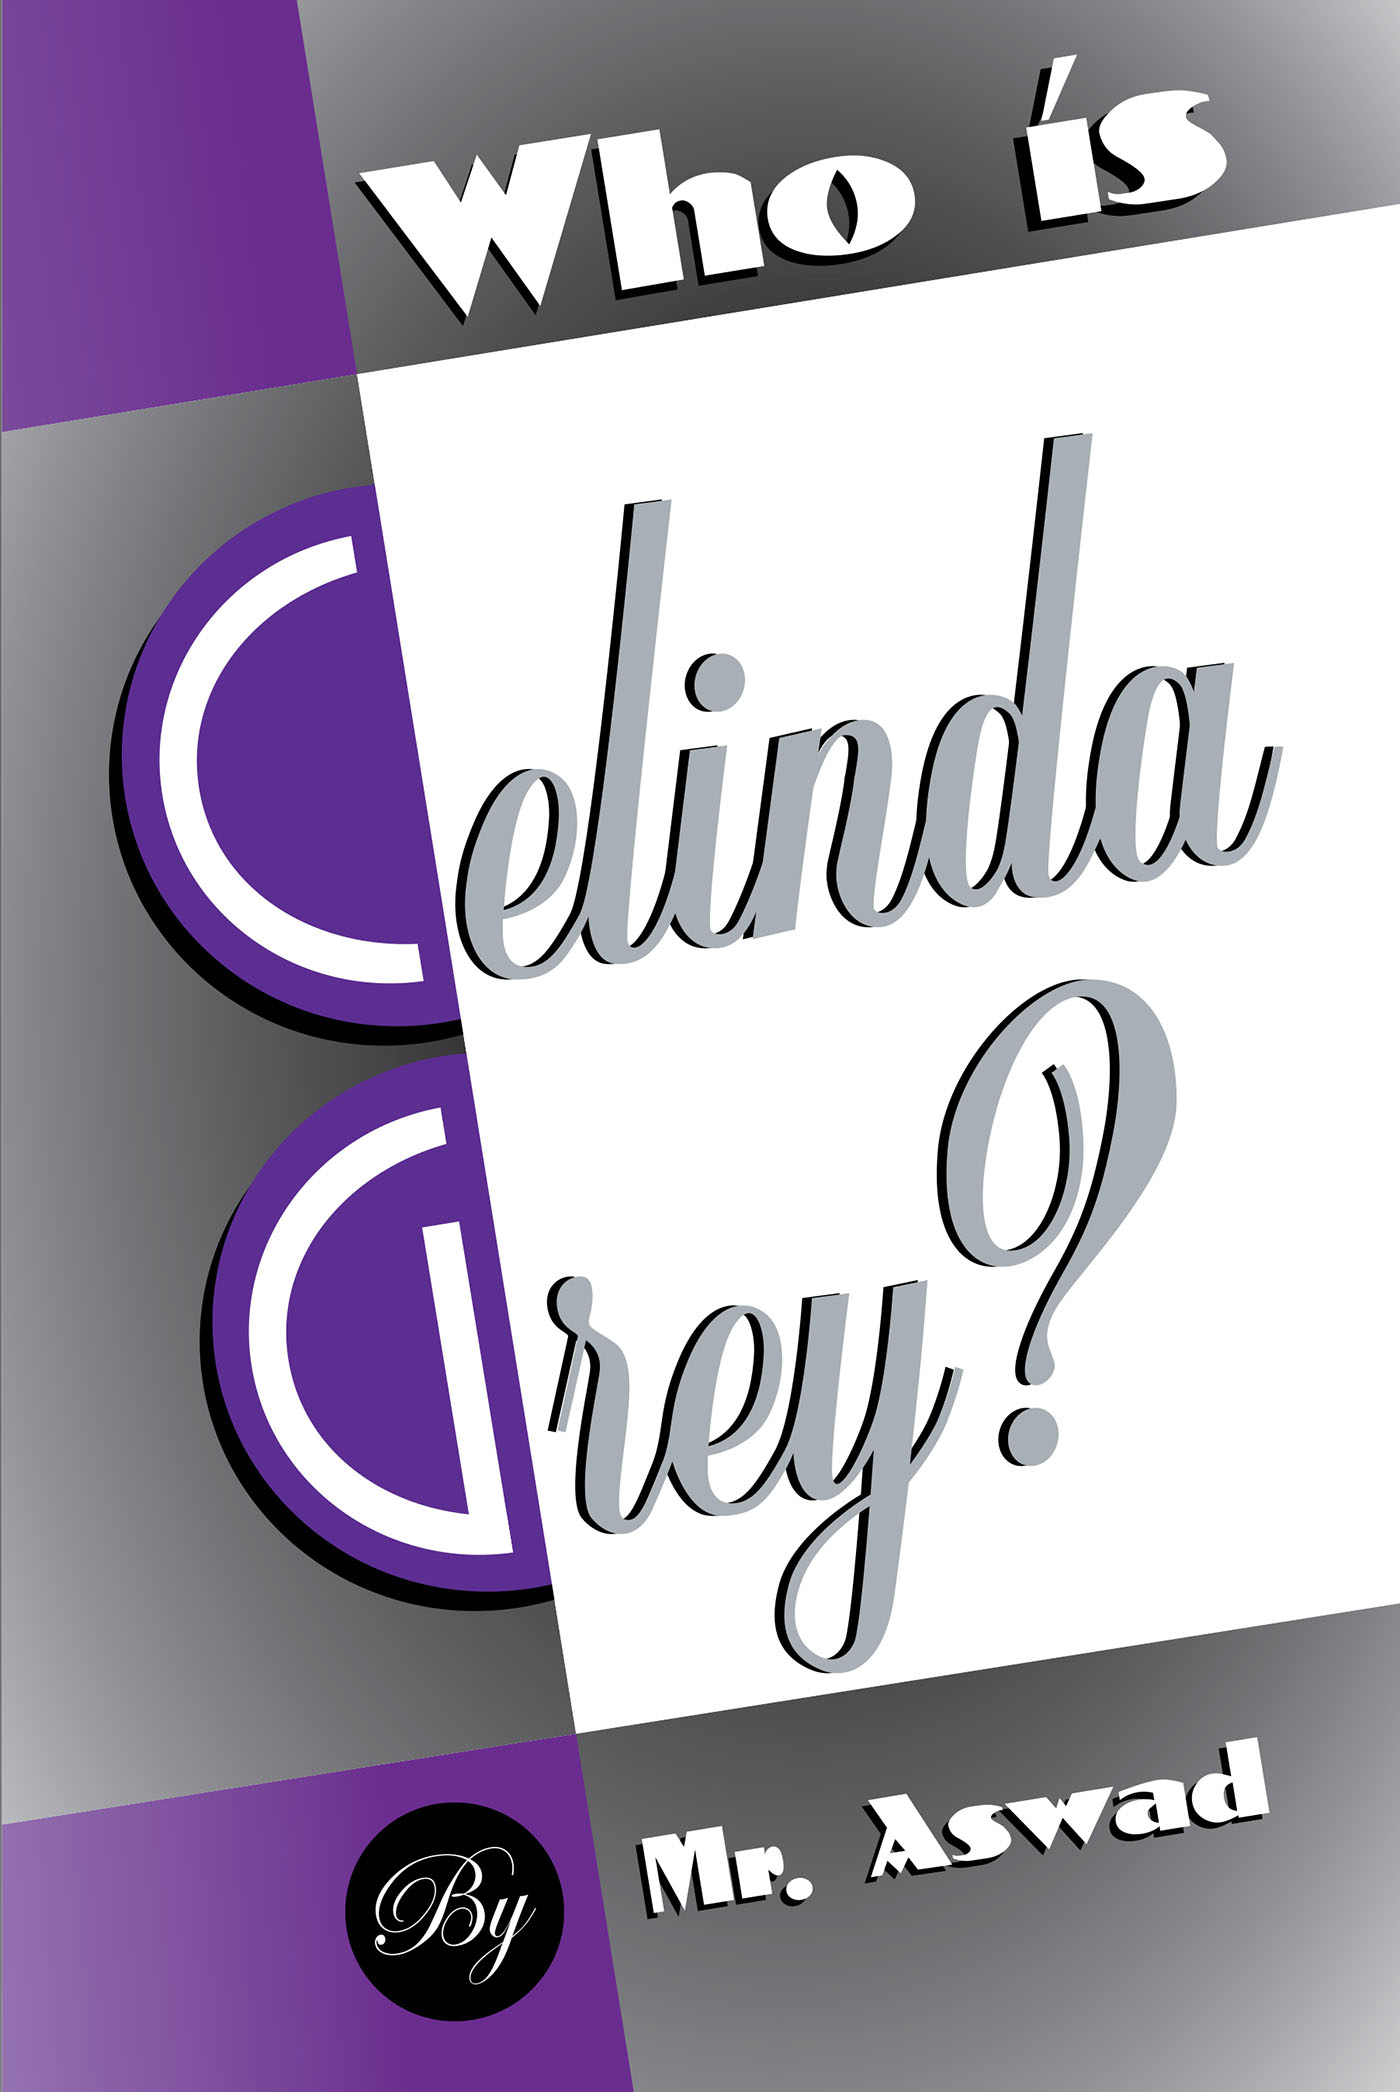 Who Is Celinda Grey? Cover Image